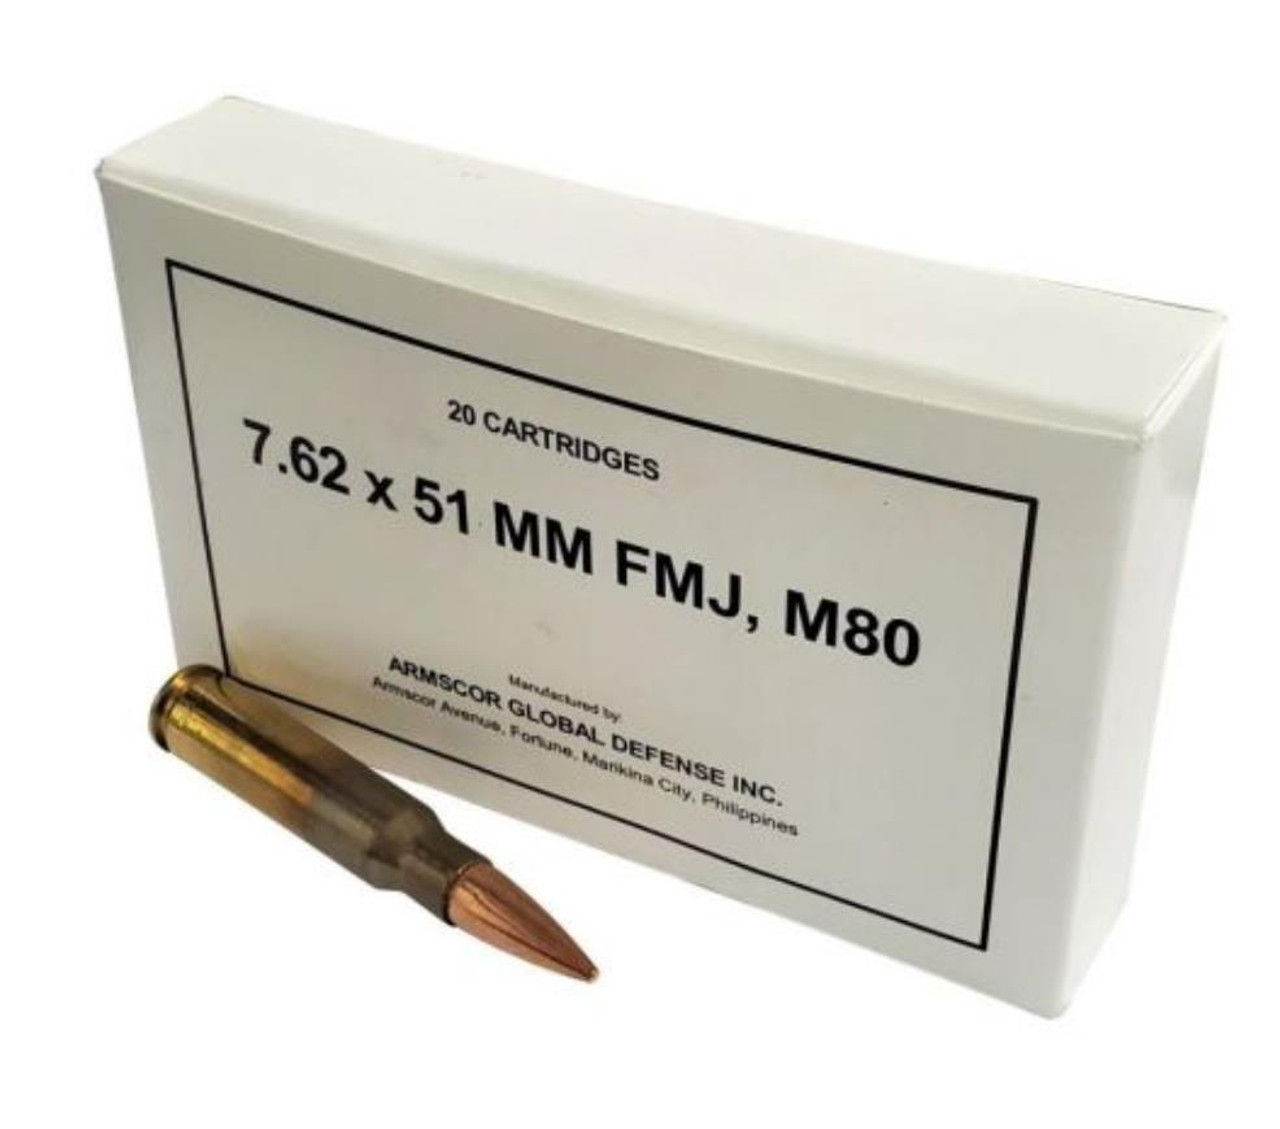 Anatomy of a bullet. On the left is a 7.62 mm NATO FMJ rifle round